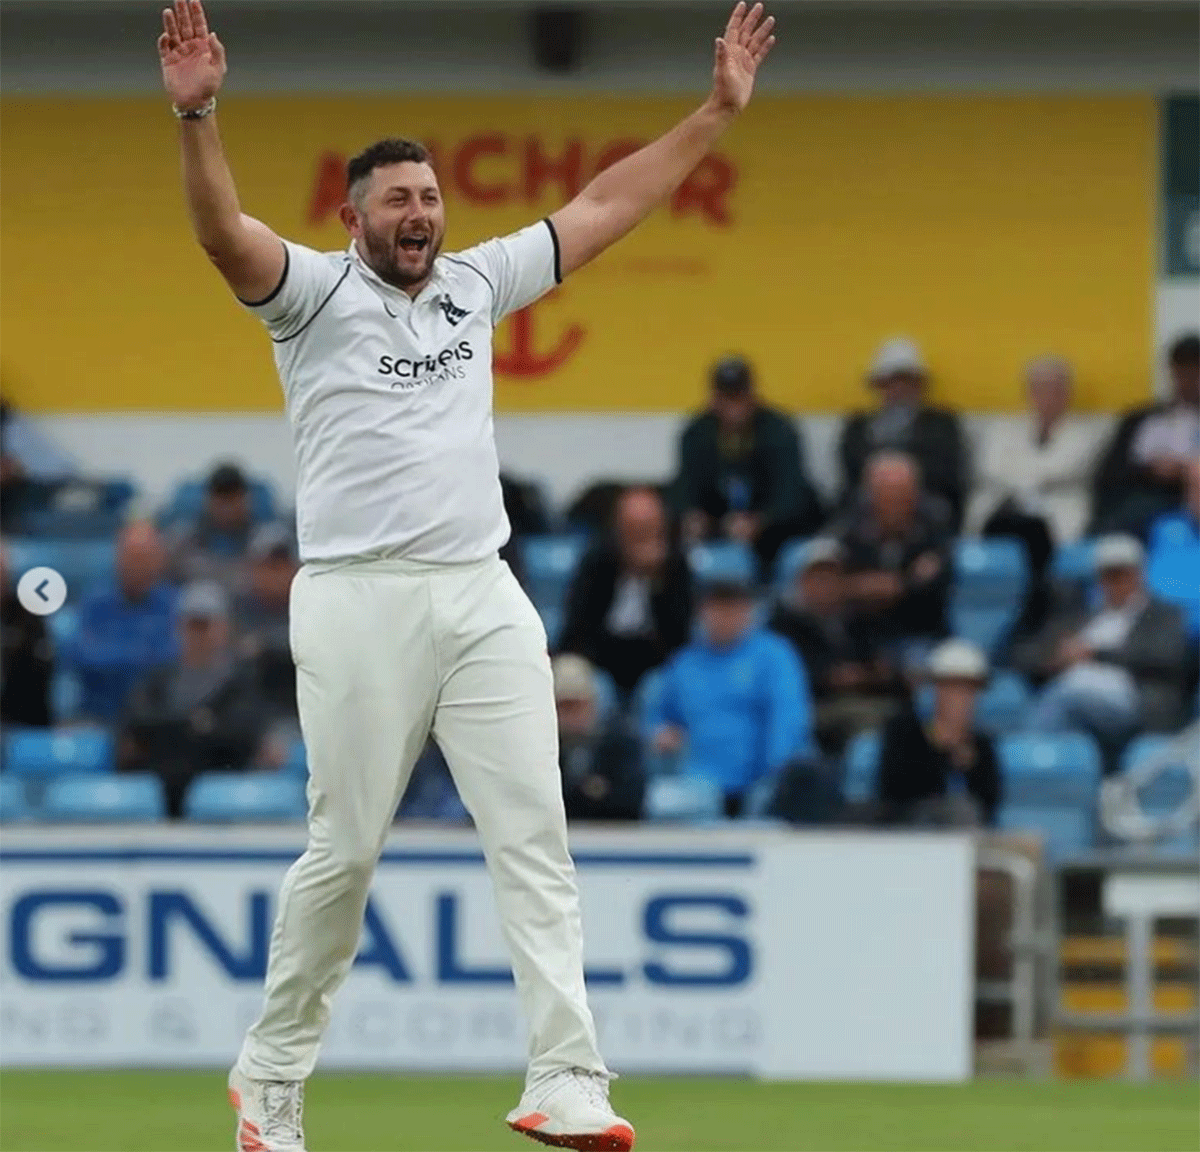 In his witness statement, the 30-year-old said Tim Bresnan, a former England pacer, "frequently made racist comments" and also claimed that he was one of "six or seven" other players who had made bullying complaint against the pacer due to his alleged behaviour.